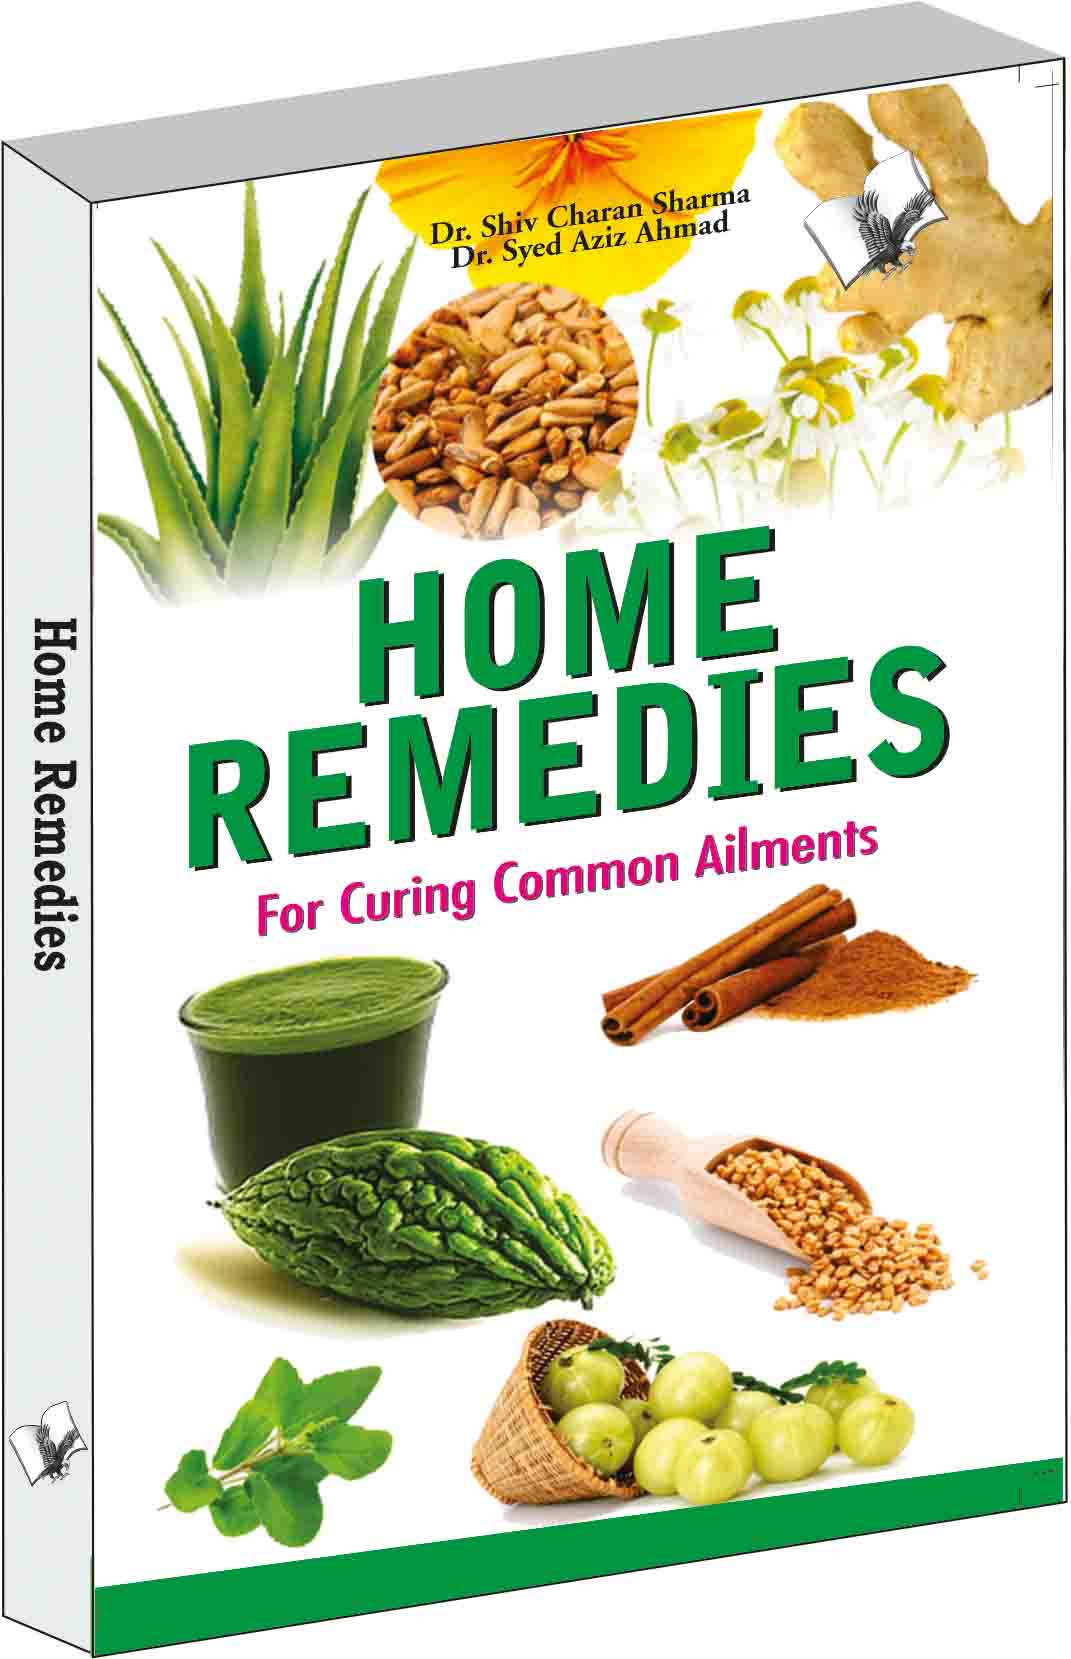 Home Remedies-For Curing Common Ailments